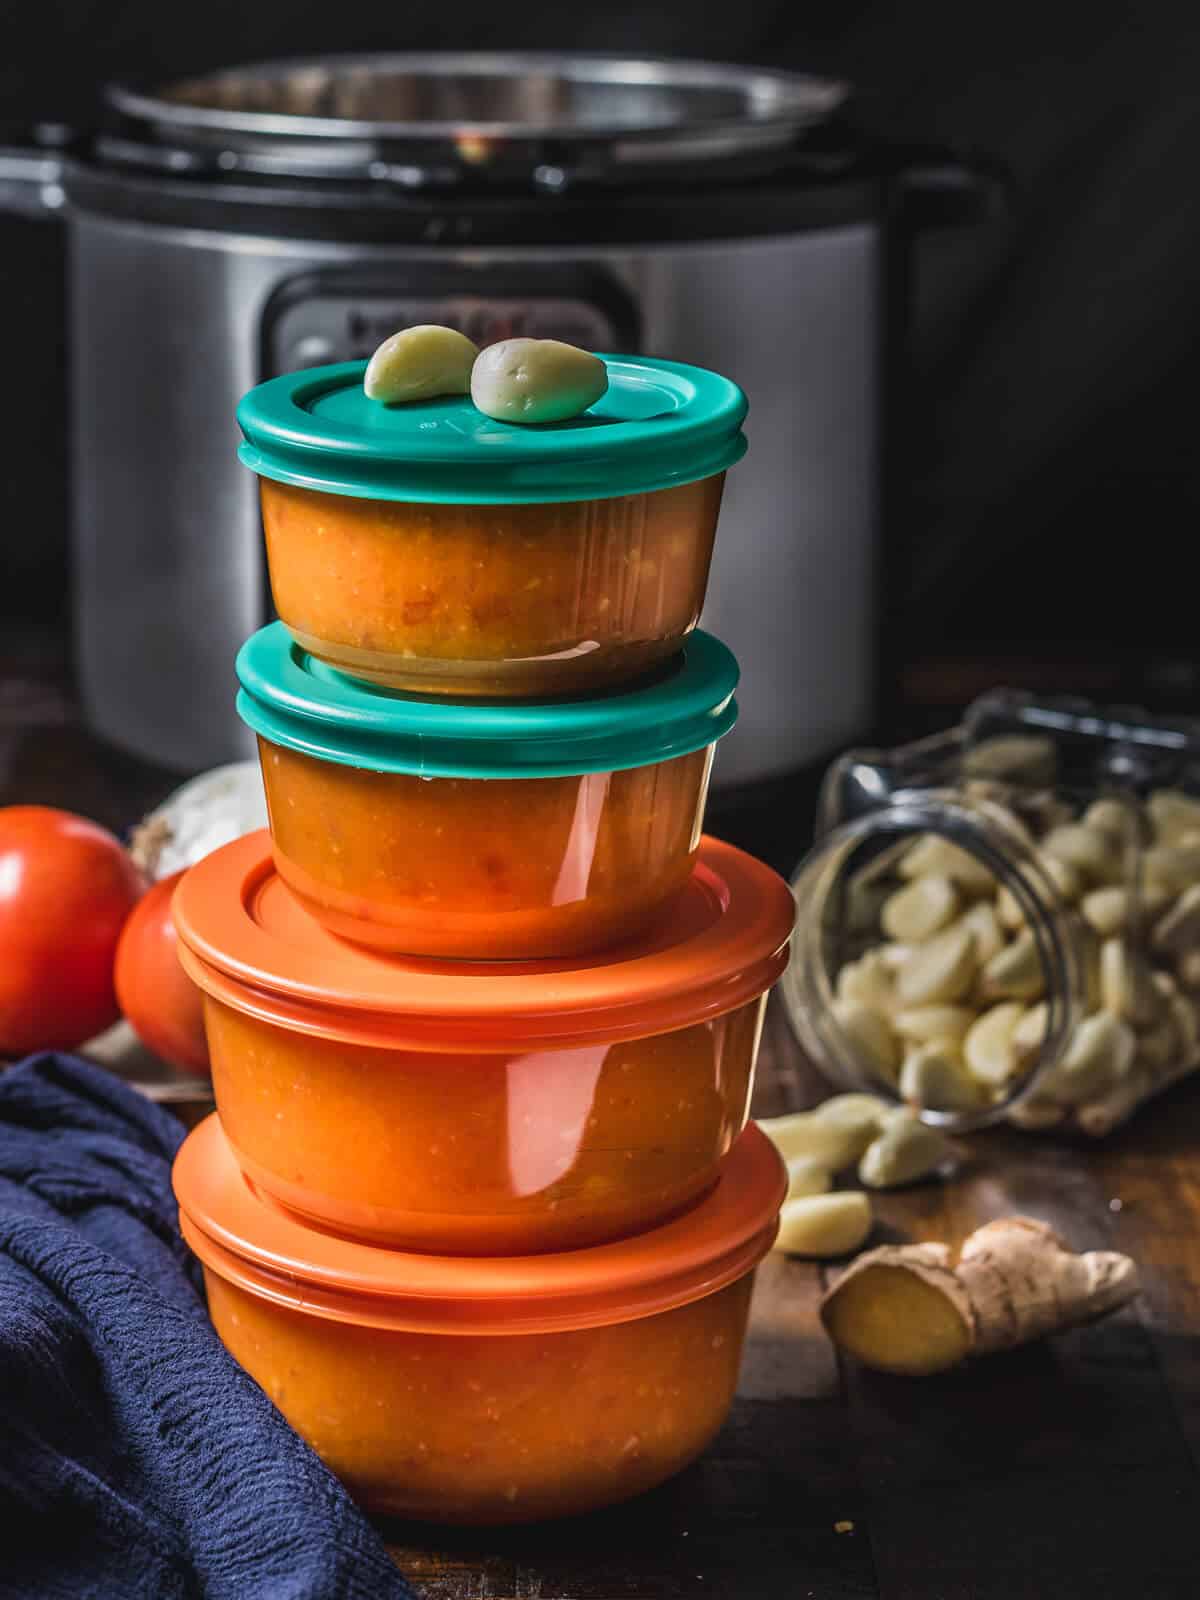 Onion tomato masala (curry sauce) stored in pyrex containers and stacked one top of the other